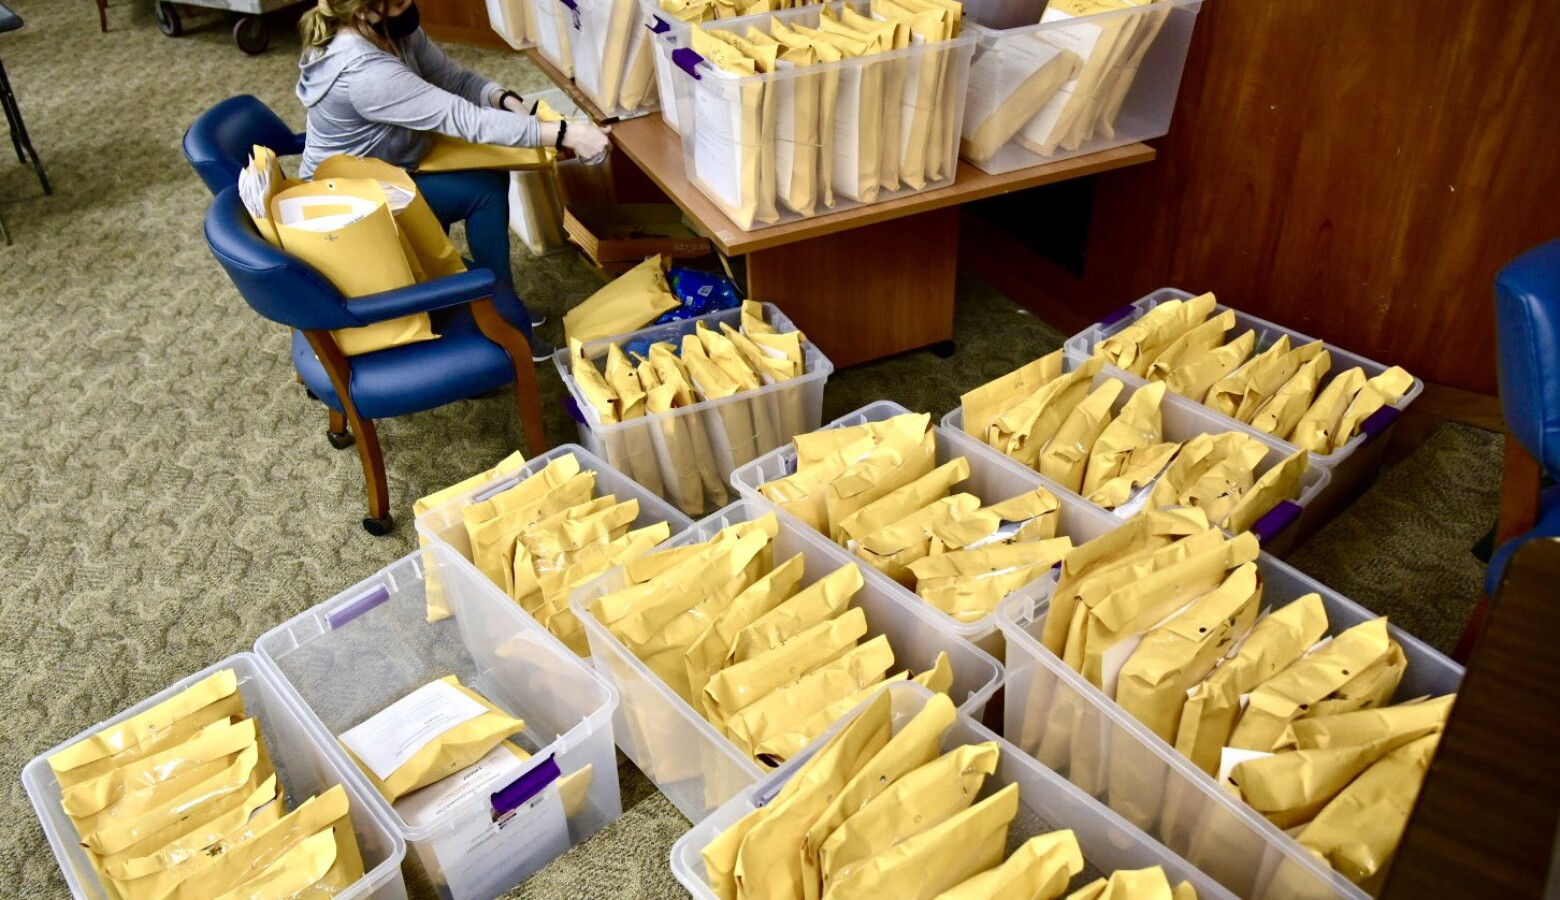 An election worker in St. Joseph County packages and stores ballot envelopes as part of the ballot counting process. (Justin Hicks/IPB News)